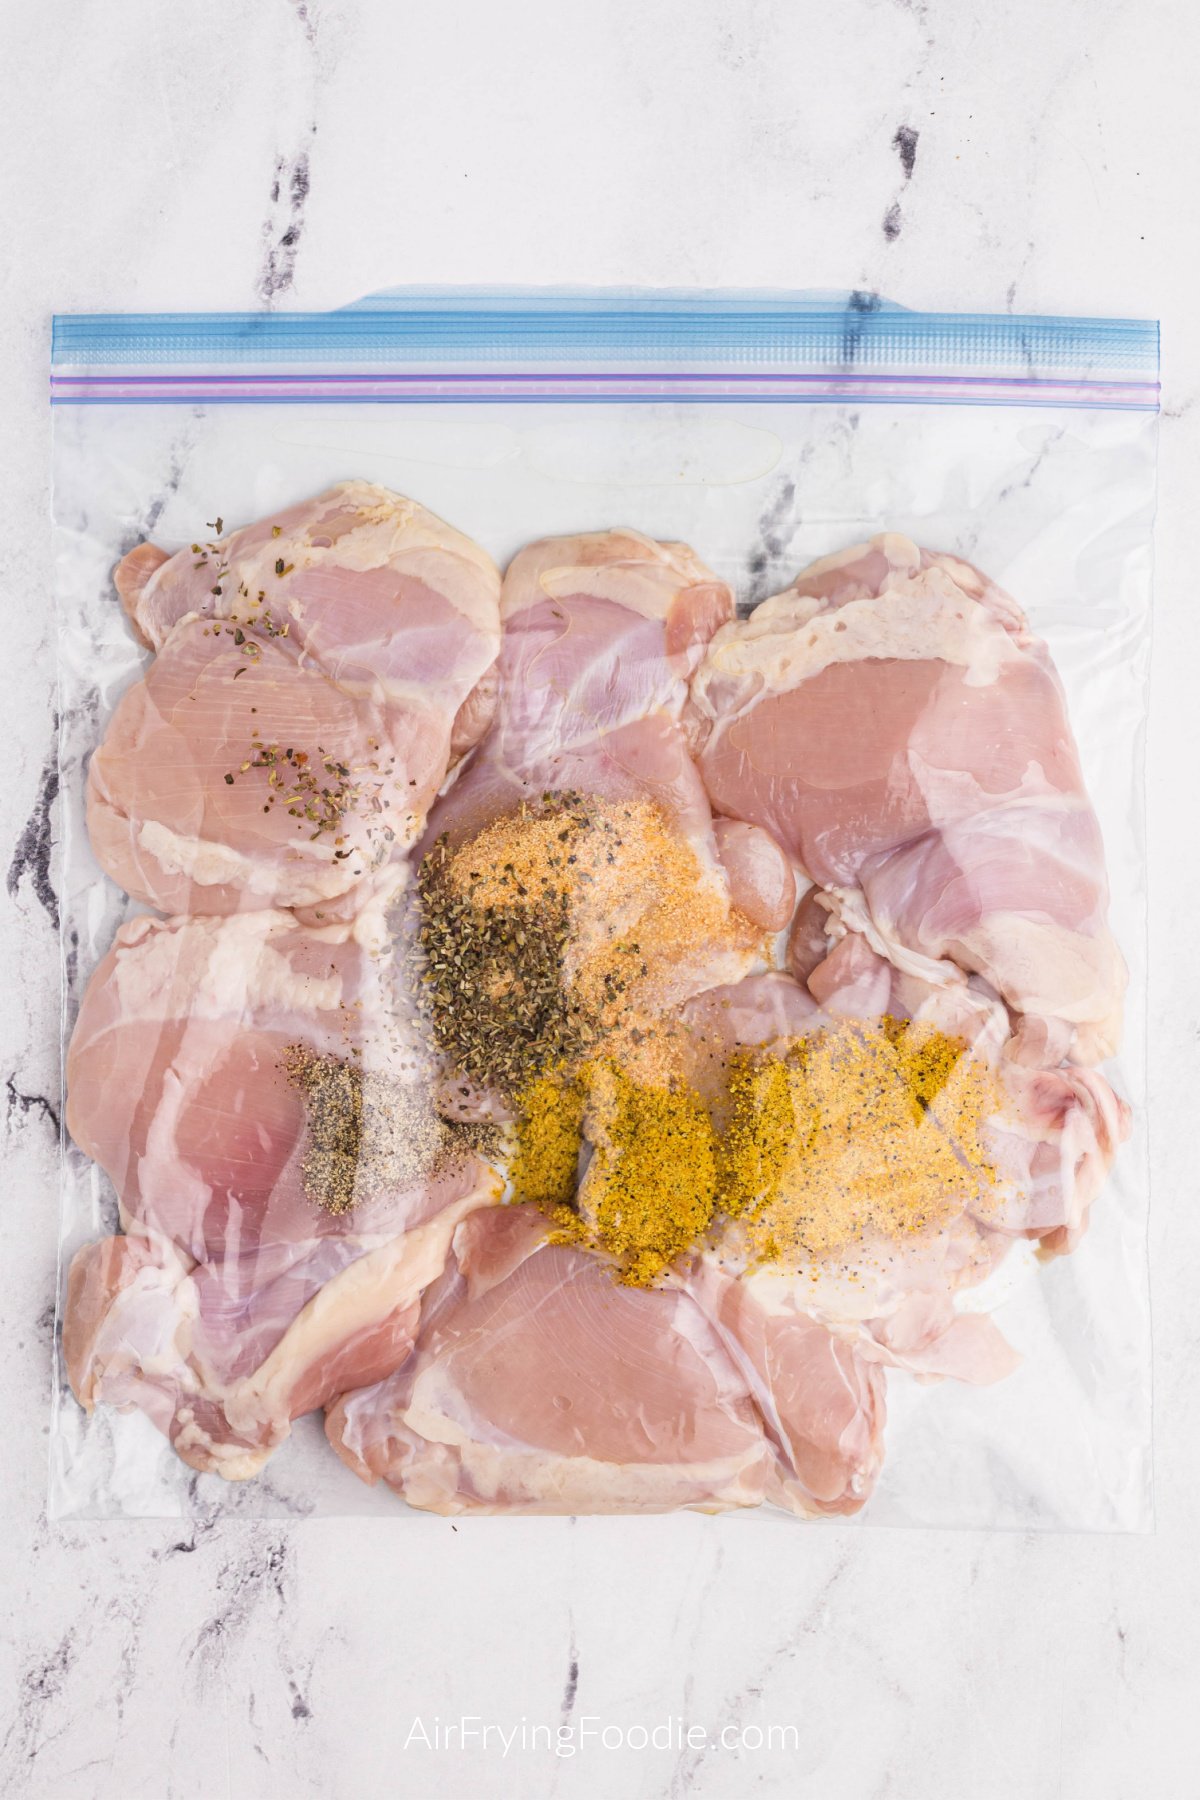 Seasonings and chicken thighs in a sealable plastic bag.